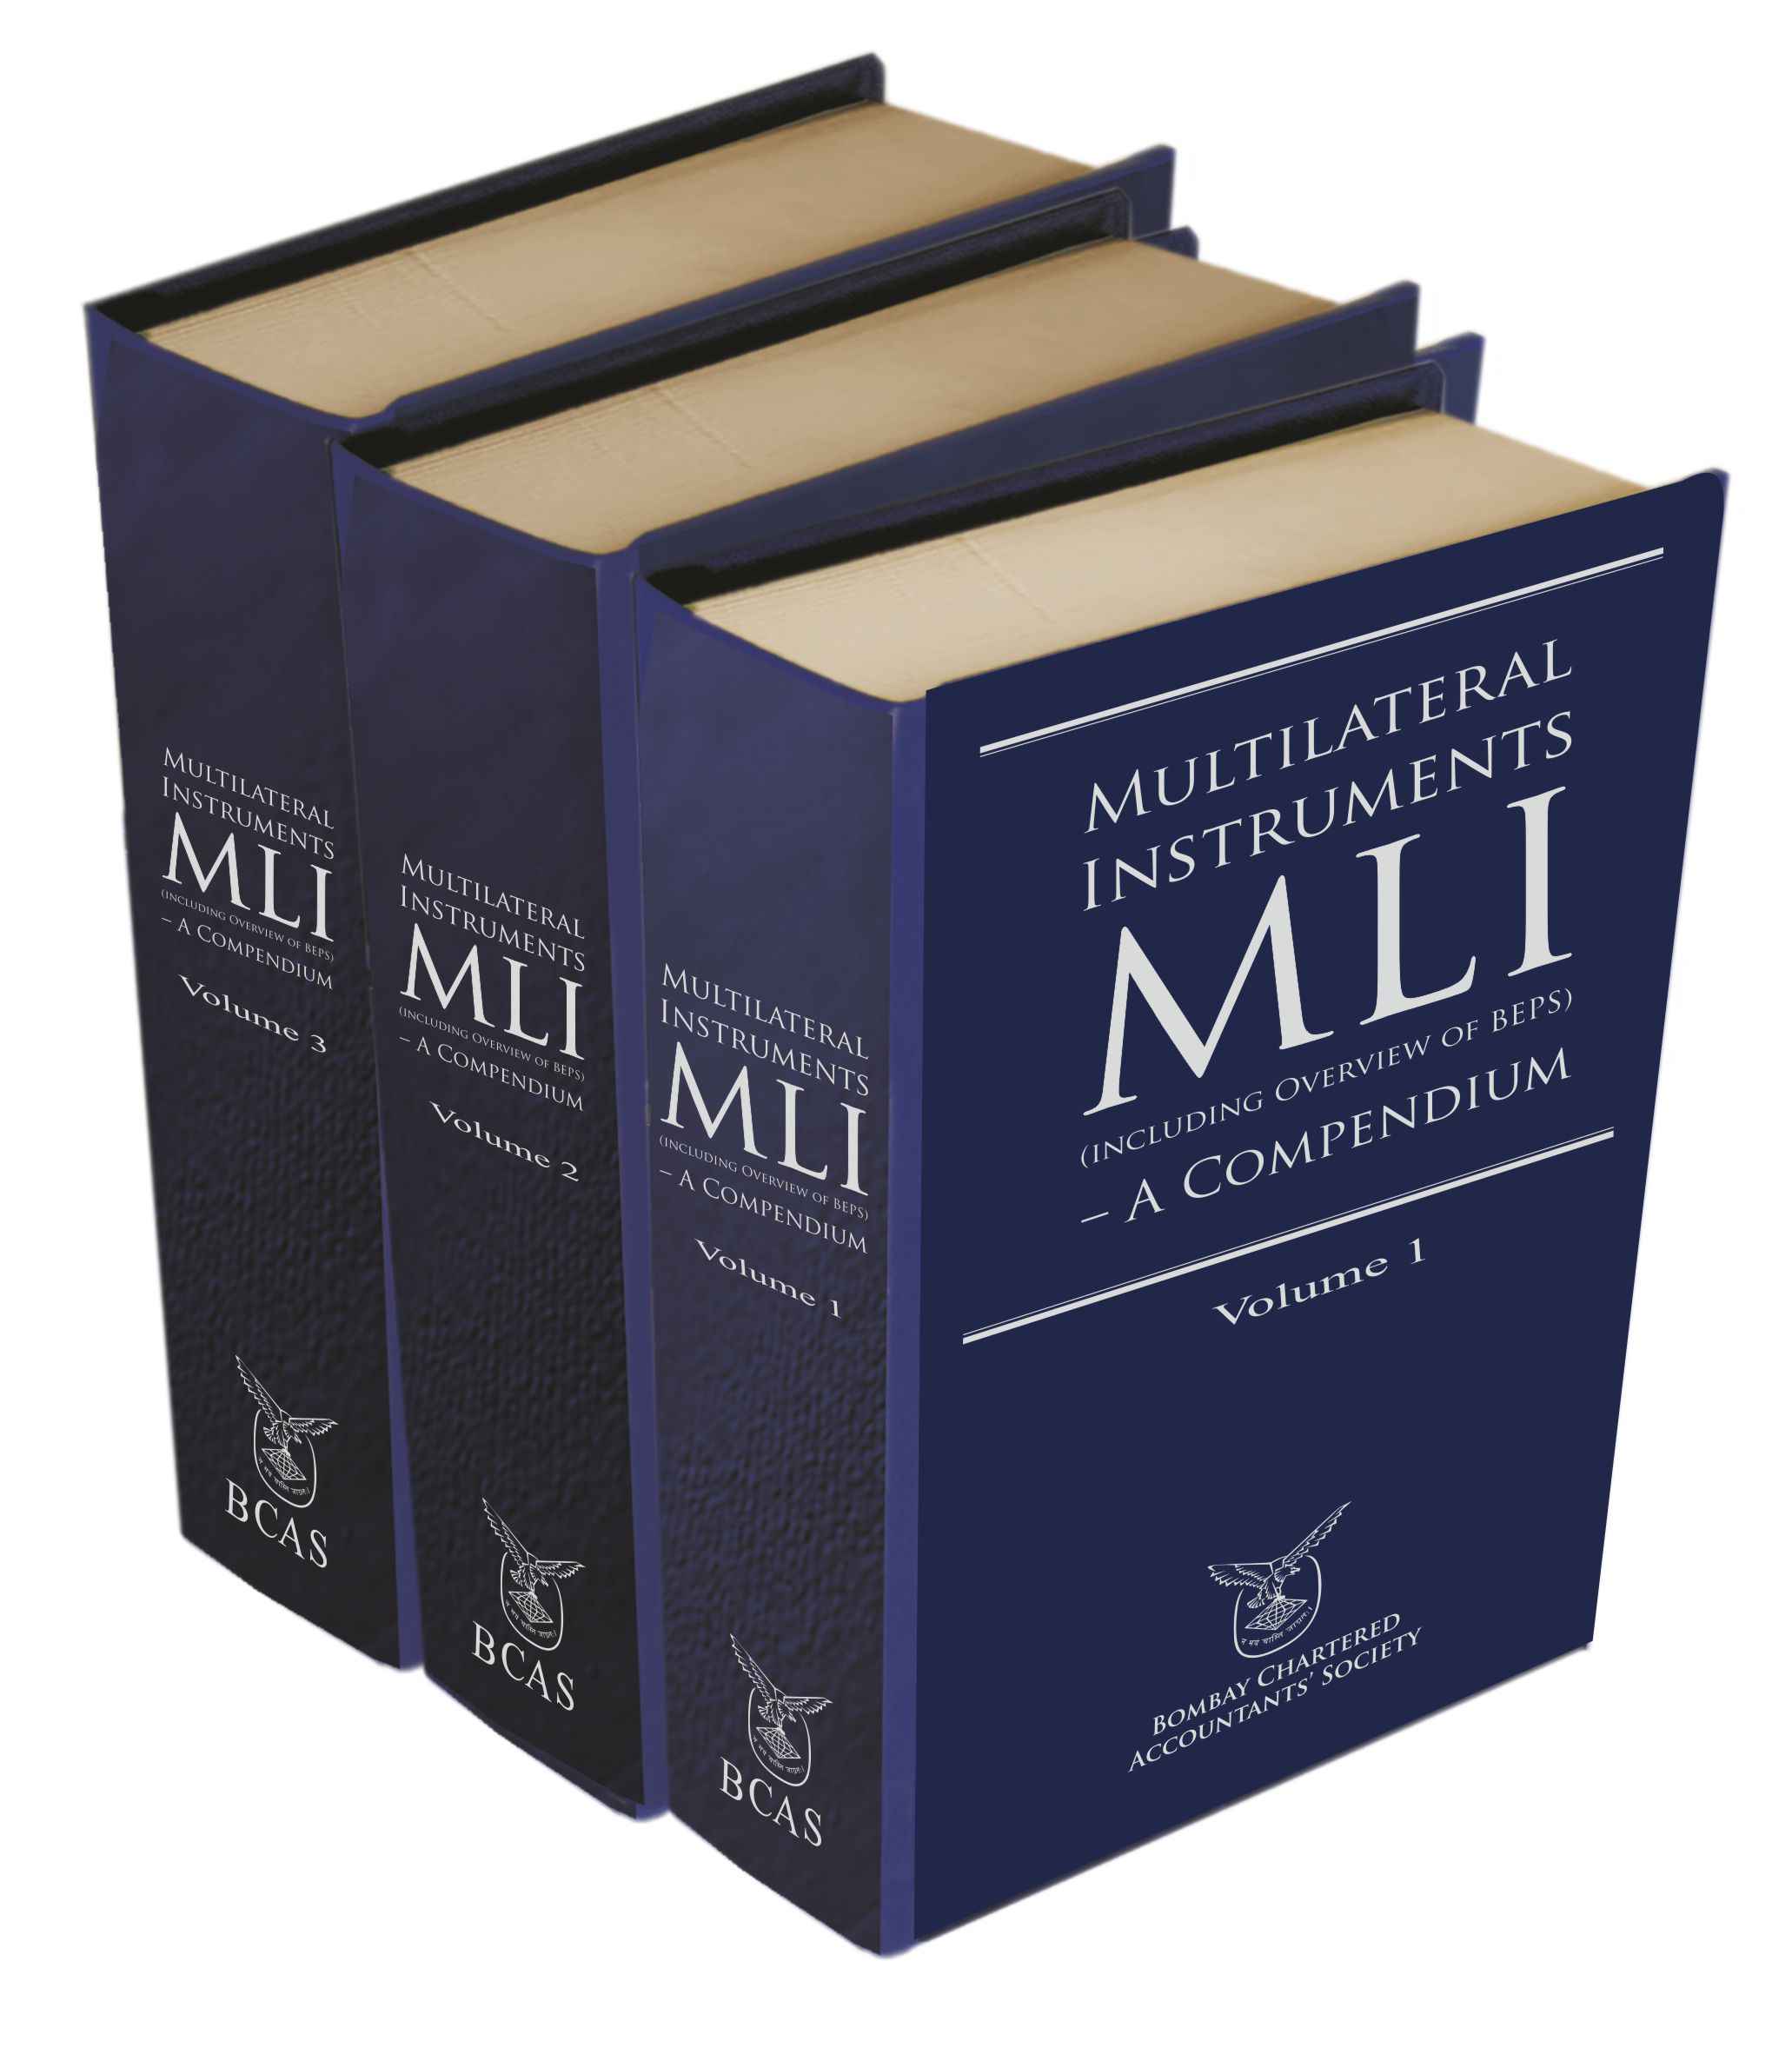 Multilateral Instruments [MLI] (including Overview of BEPS) – A Compendium